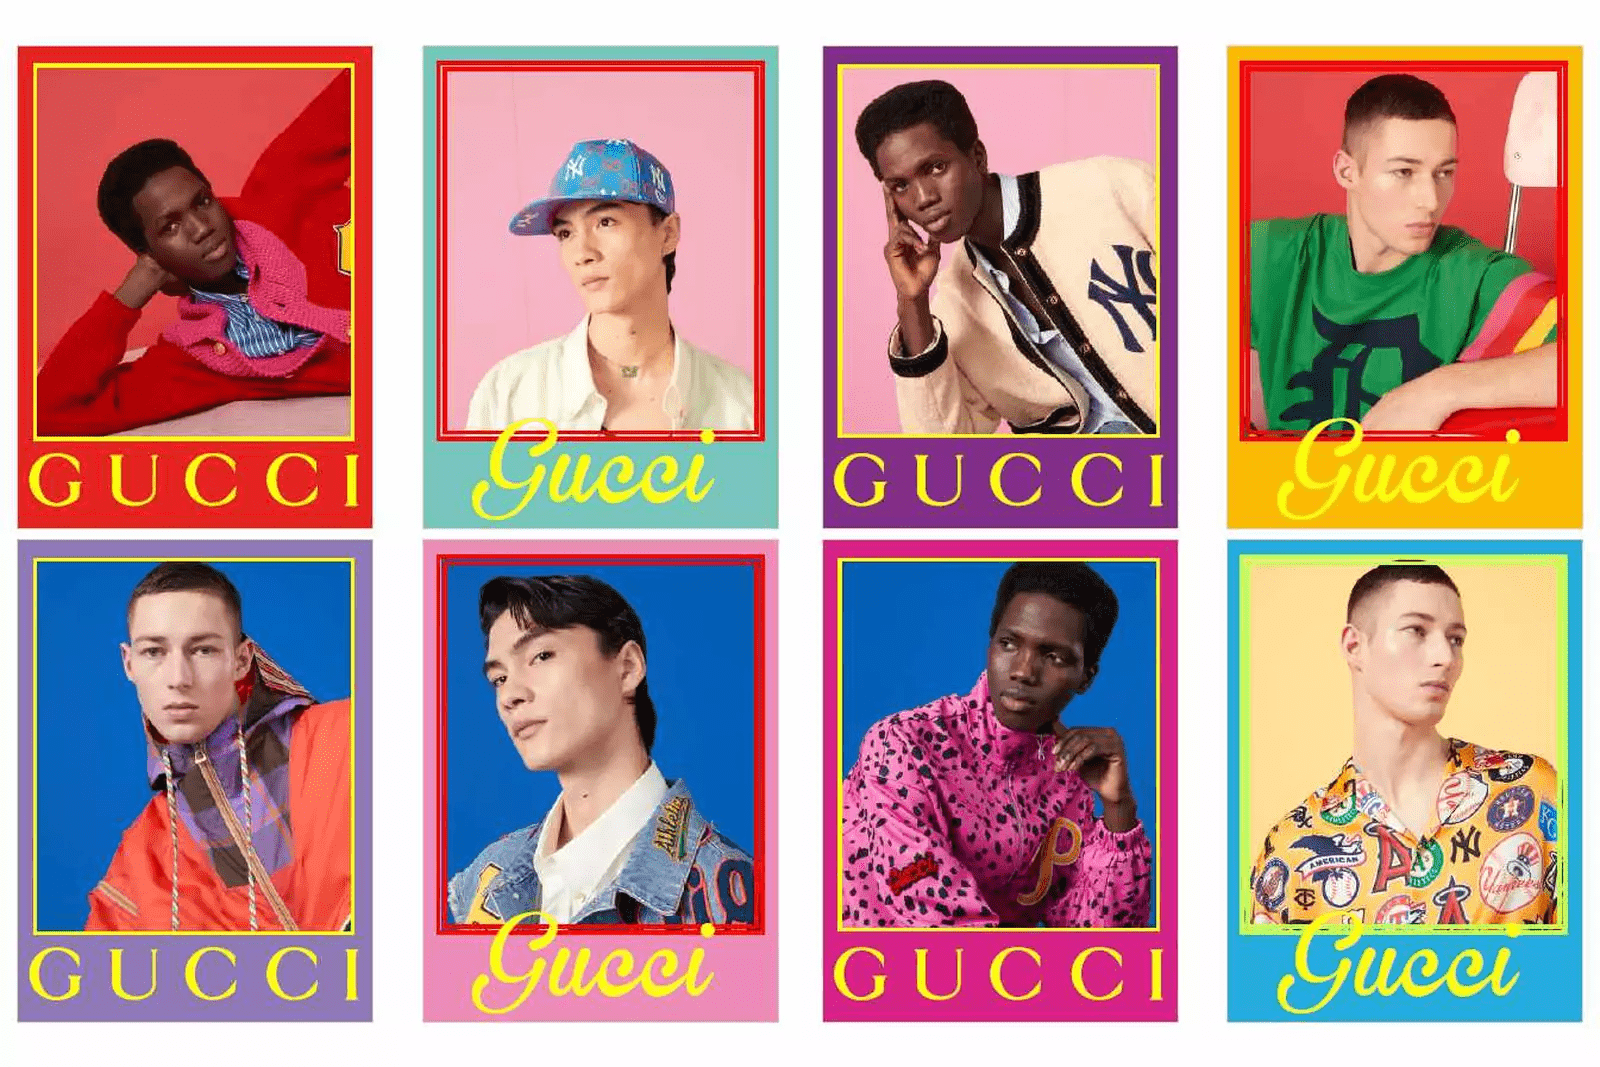 Gucci, Accessories, Gucci Baseball Cap Limited Edition 0 Years